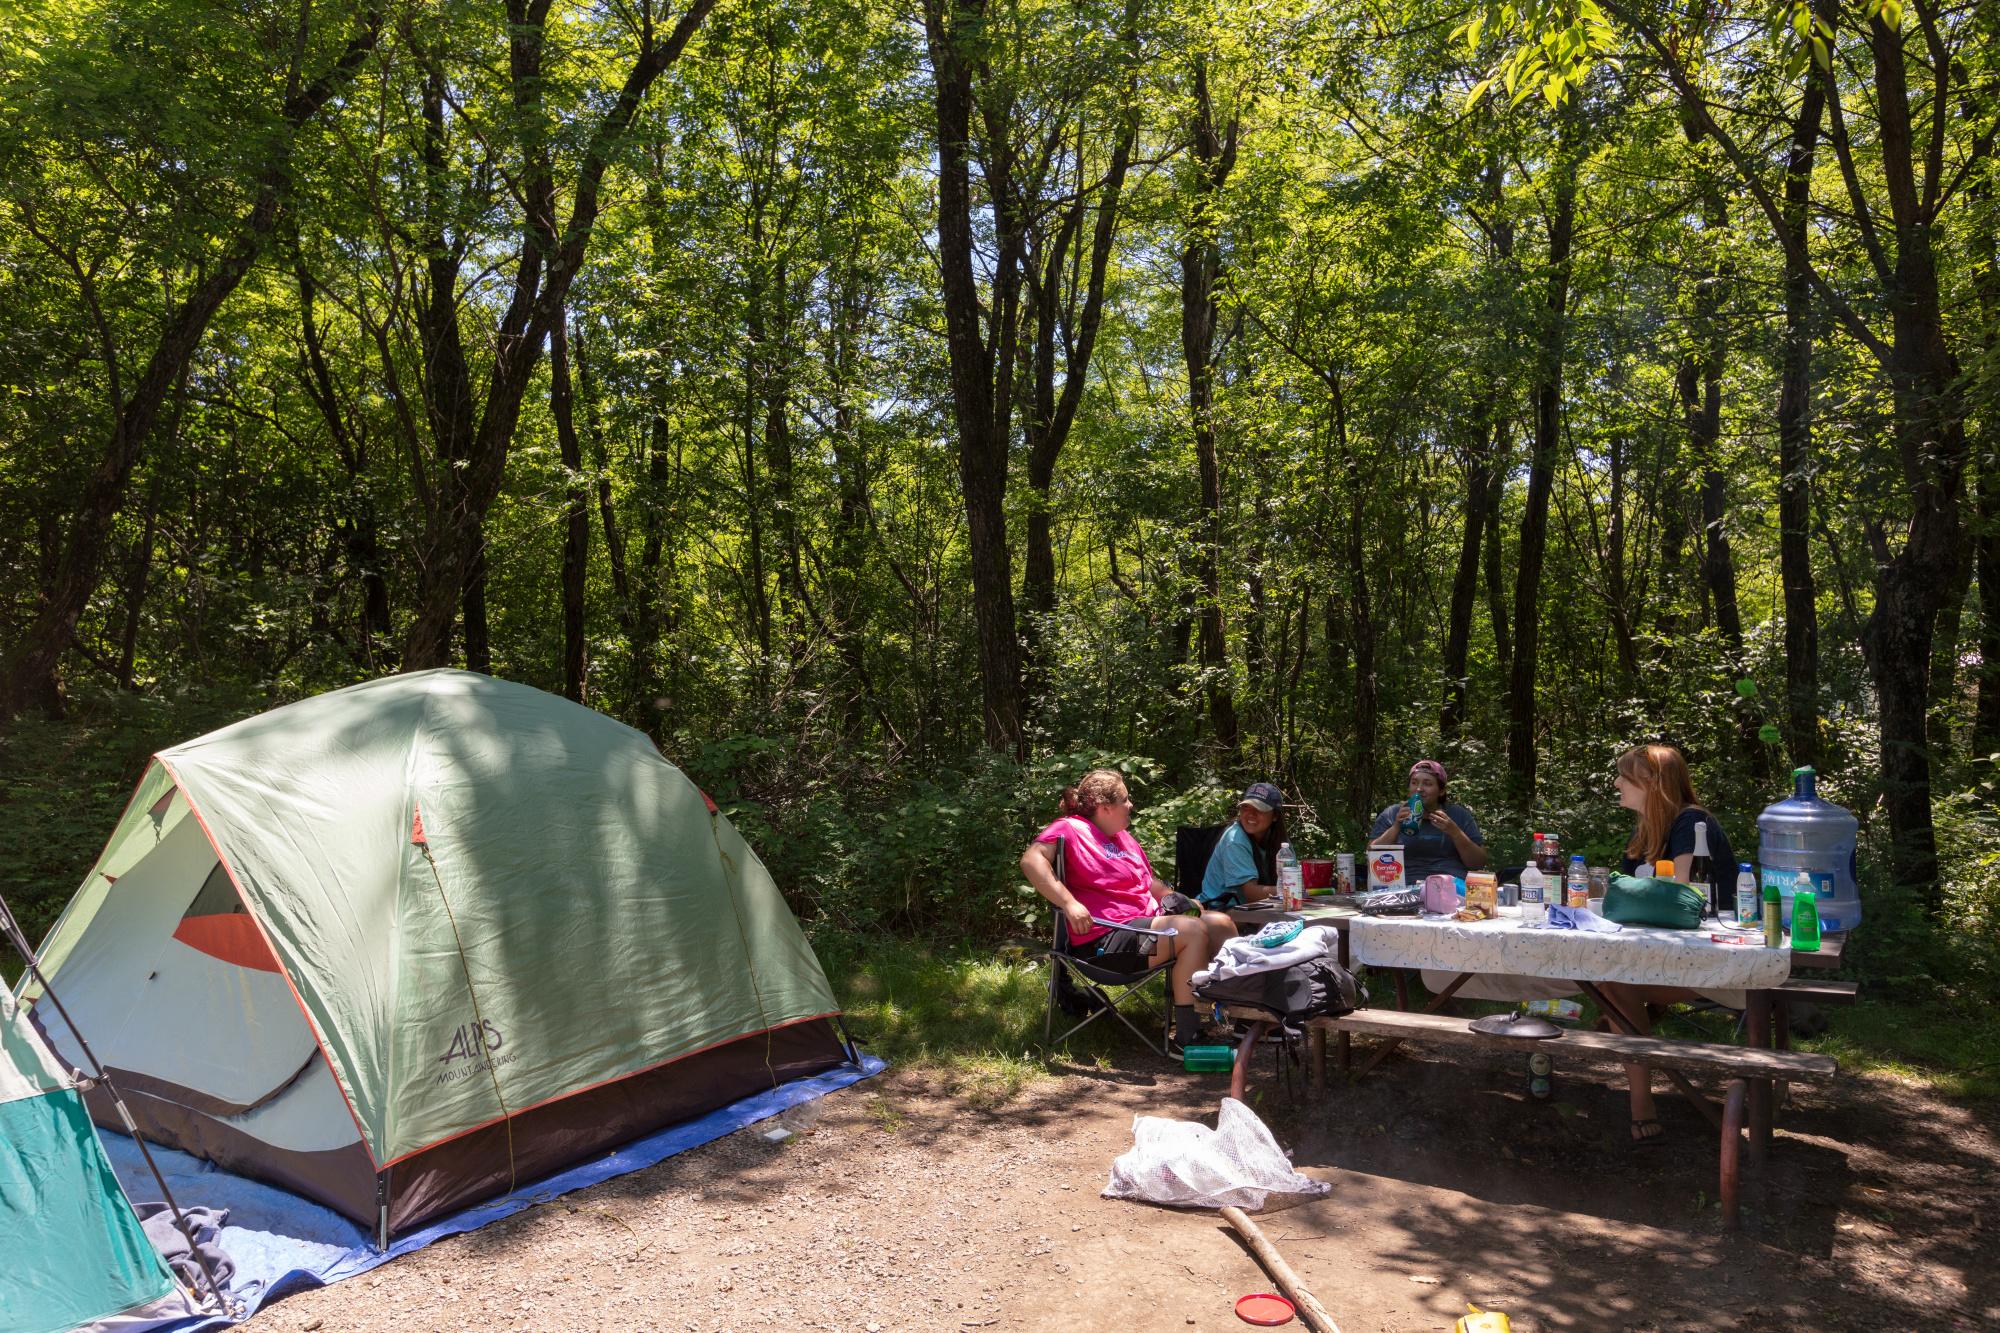 A group of people sit at a picnic table next to a tent under a canopy of green trees in a campground